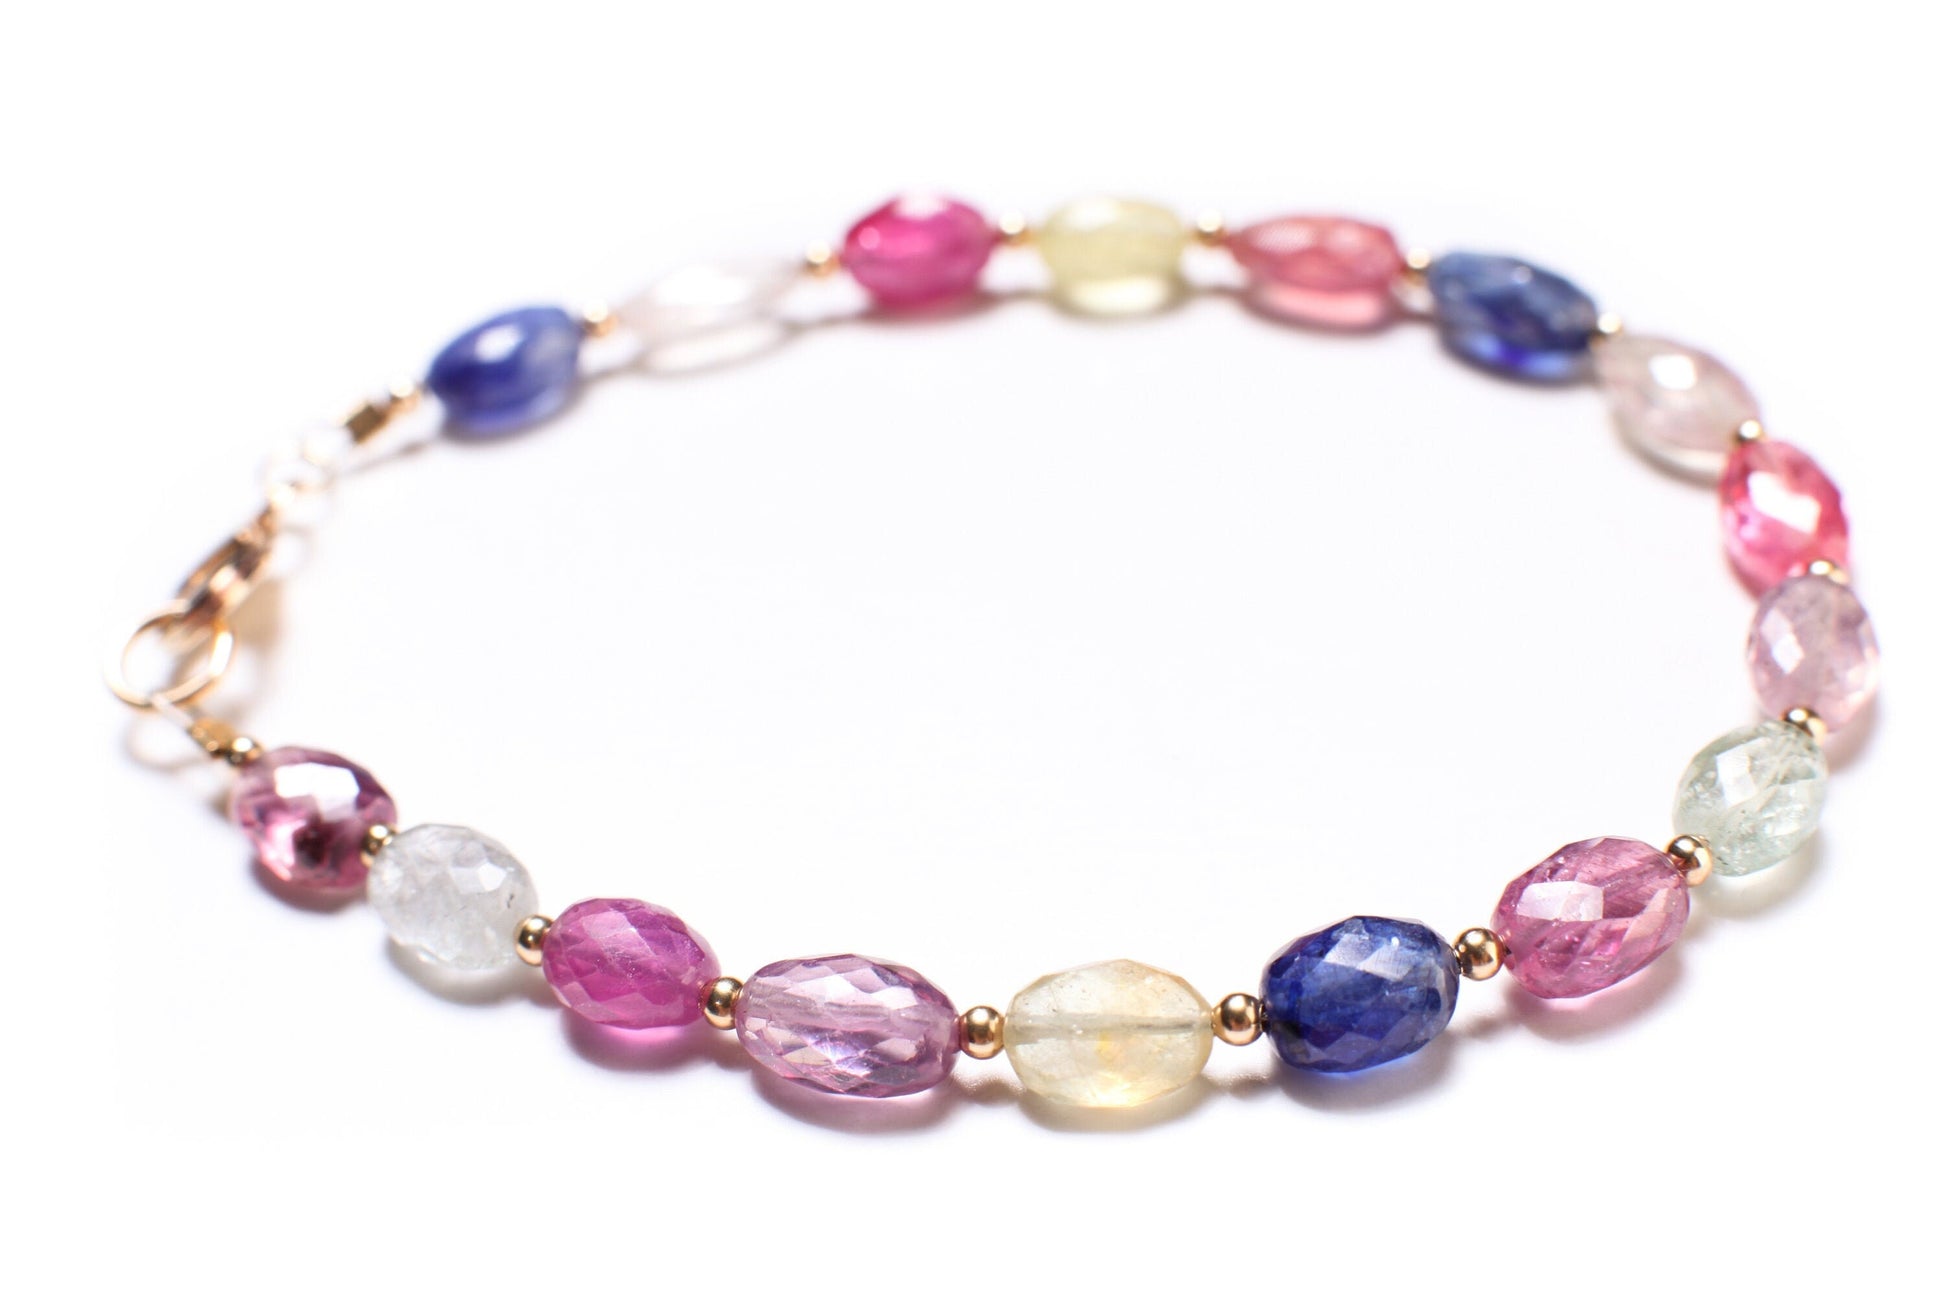 Natural Multi Sapphire 5x7mm Faceted Puffed Oval AAA clear quality Gemstone in 14k Gold Filled spacer and clasp Bracelet. Precious Gift .